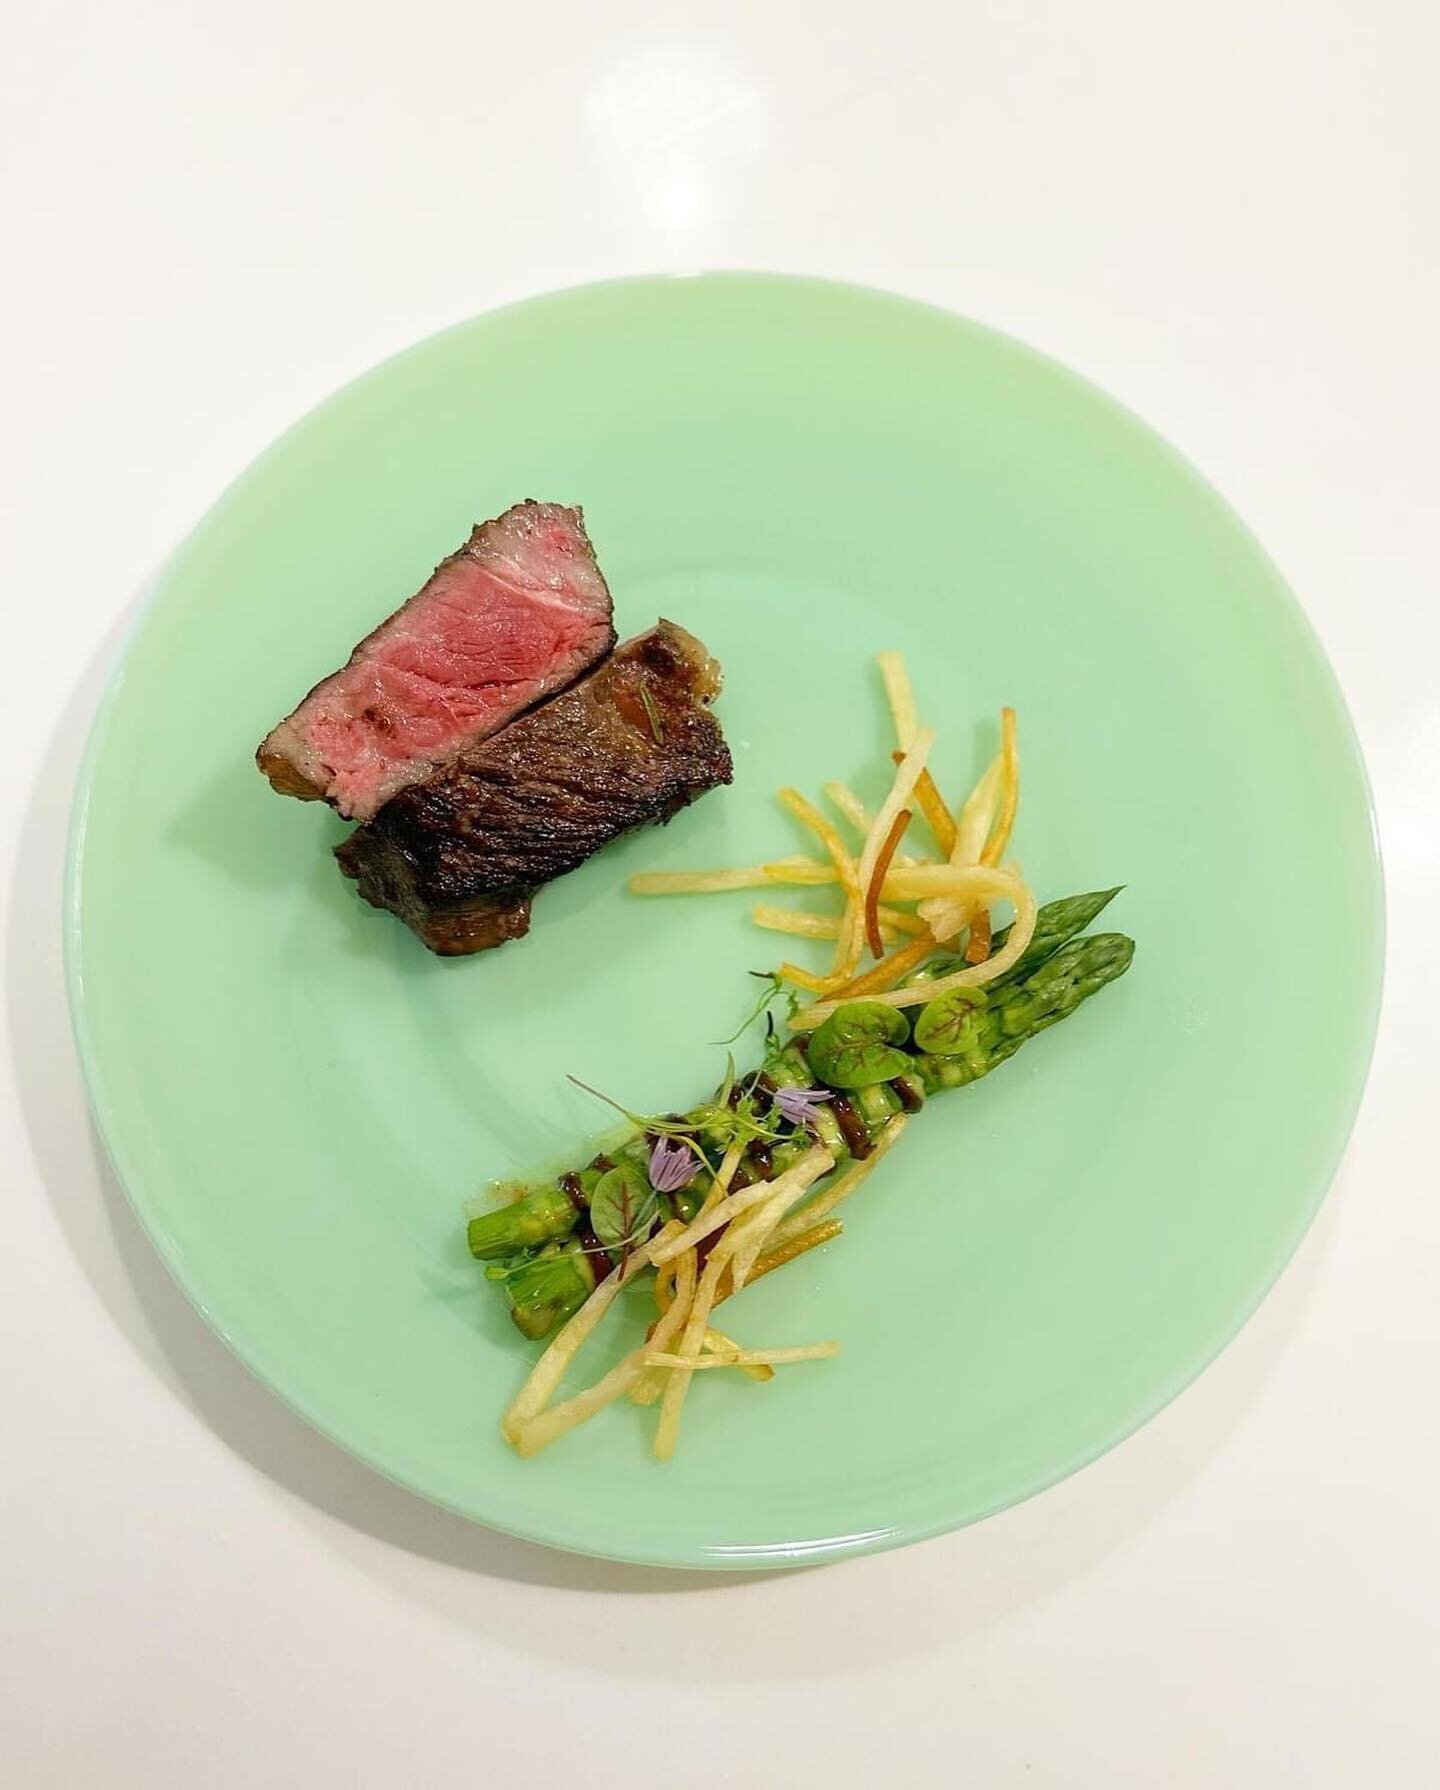 Another beautiful Frannie&rsquo;s Market Table was hosted last night @abloomfarm 
The main entree was a fun take on steak frites! Served with asparagus, lovage, ramps, @theblackgarlicco black garlic, and chermula ranch. This dish paired beautifully w